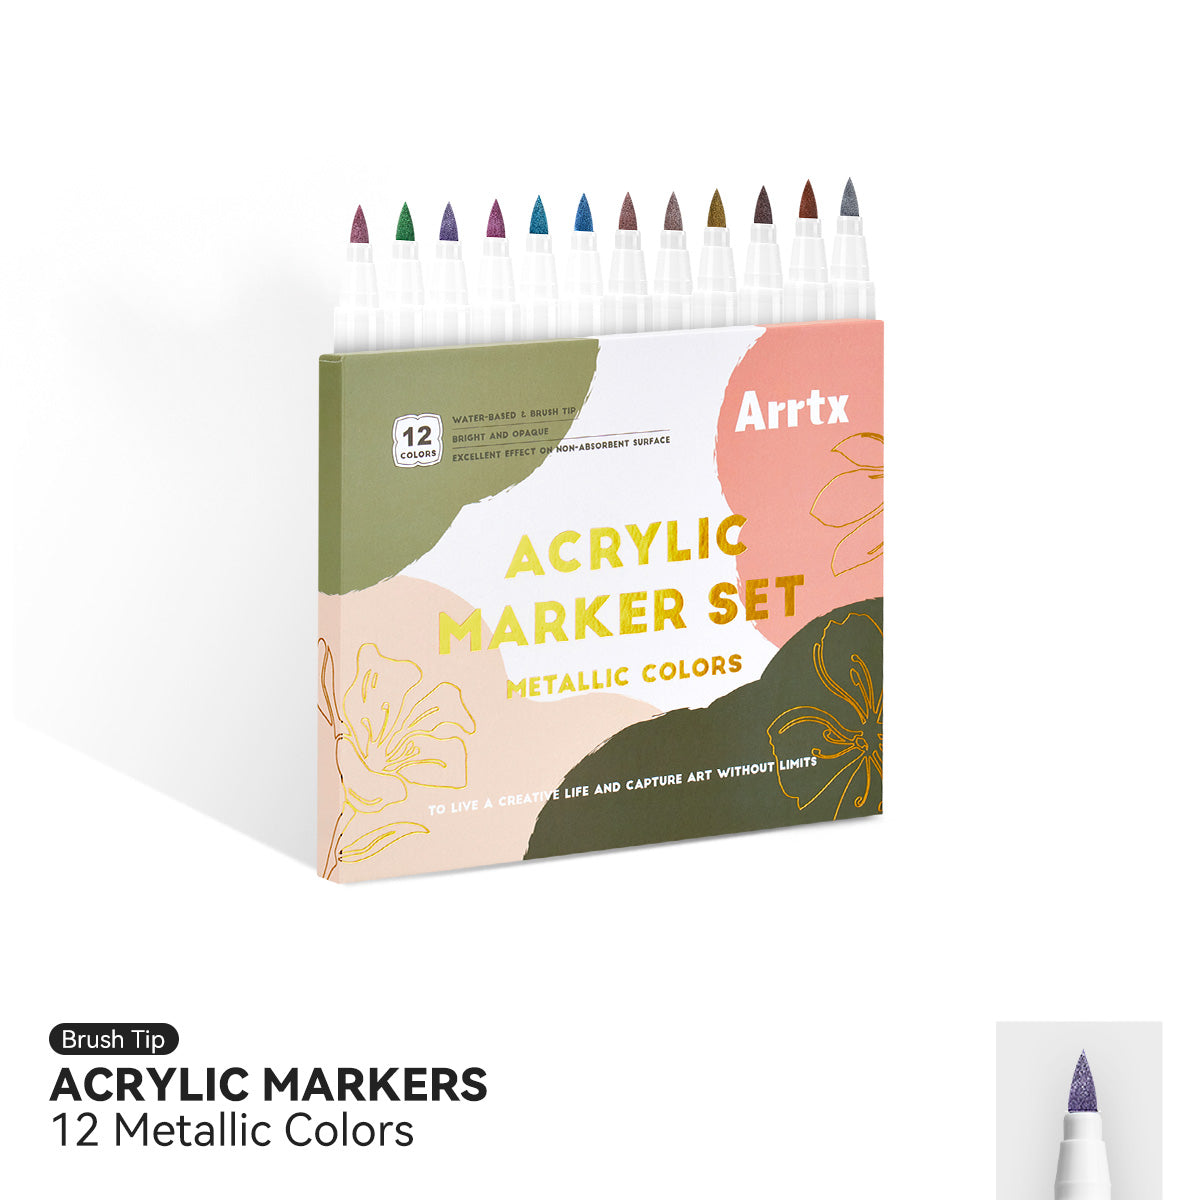 Arrtx Alcohol Markers Alp 80 Colors,Dual Tips Permanent Drawing Markers Art Markers with Gift Box for Artists Adult Coloring Illustration, Design, Ani